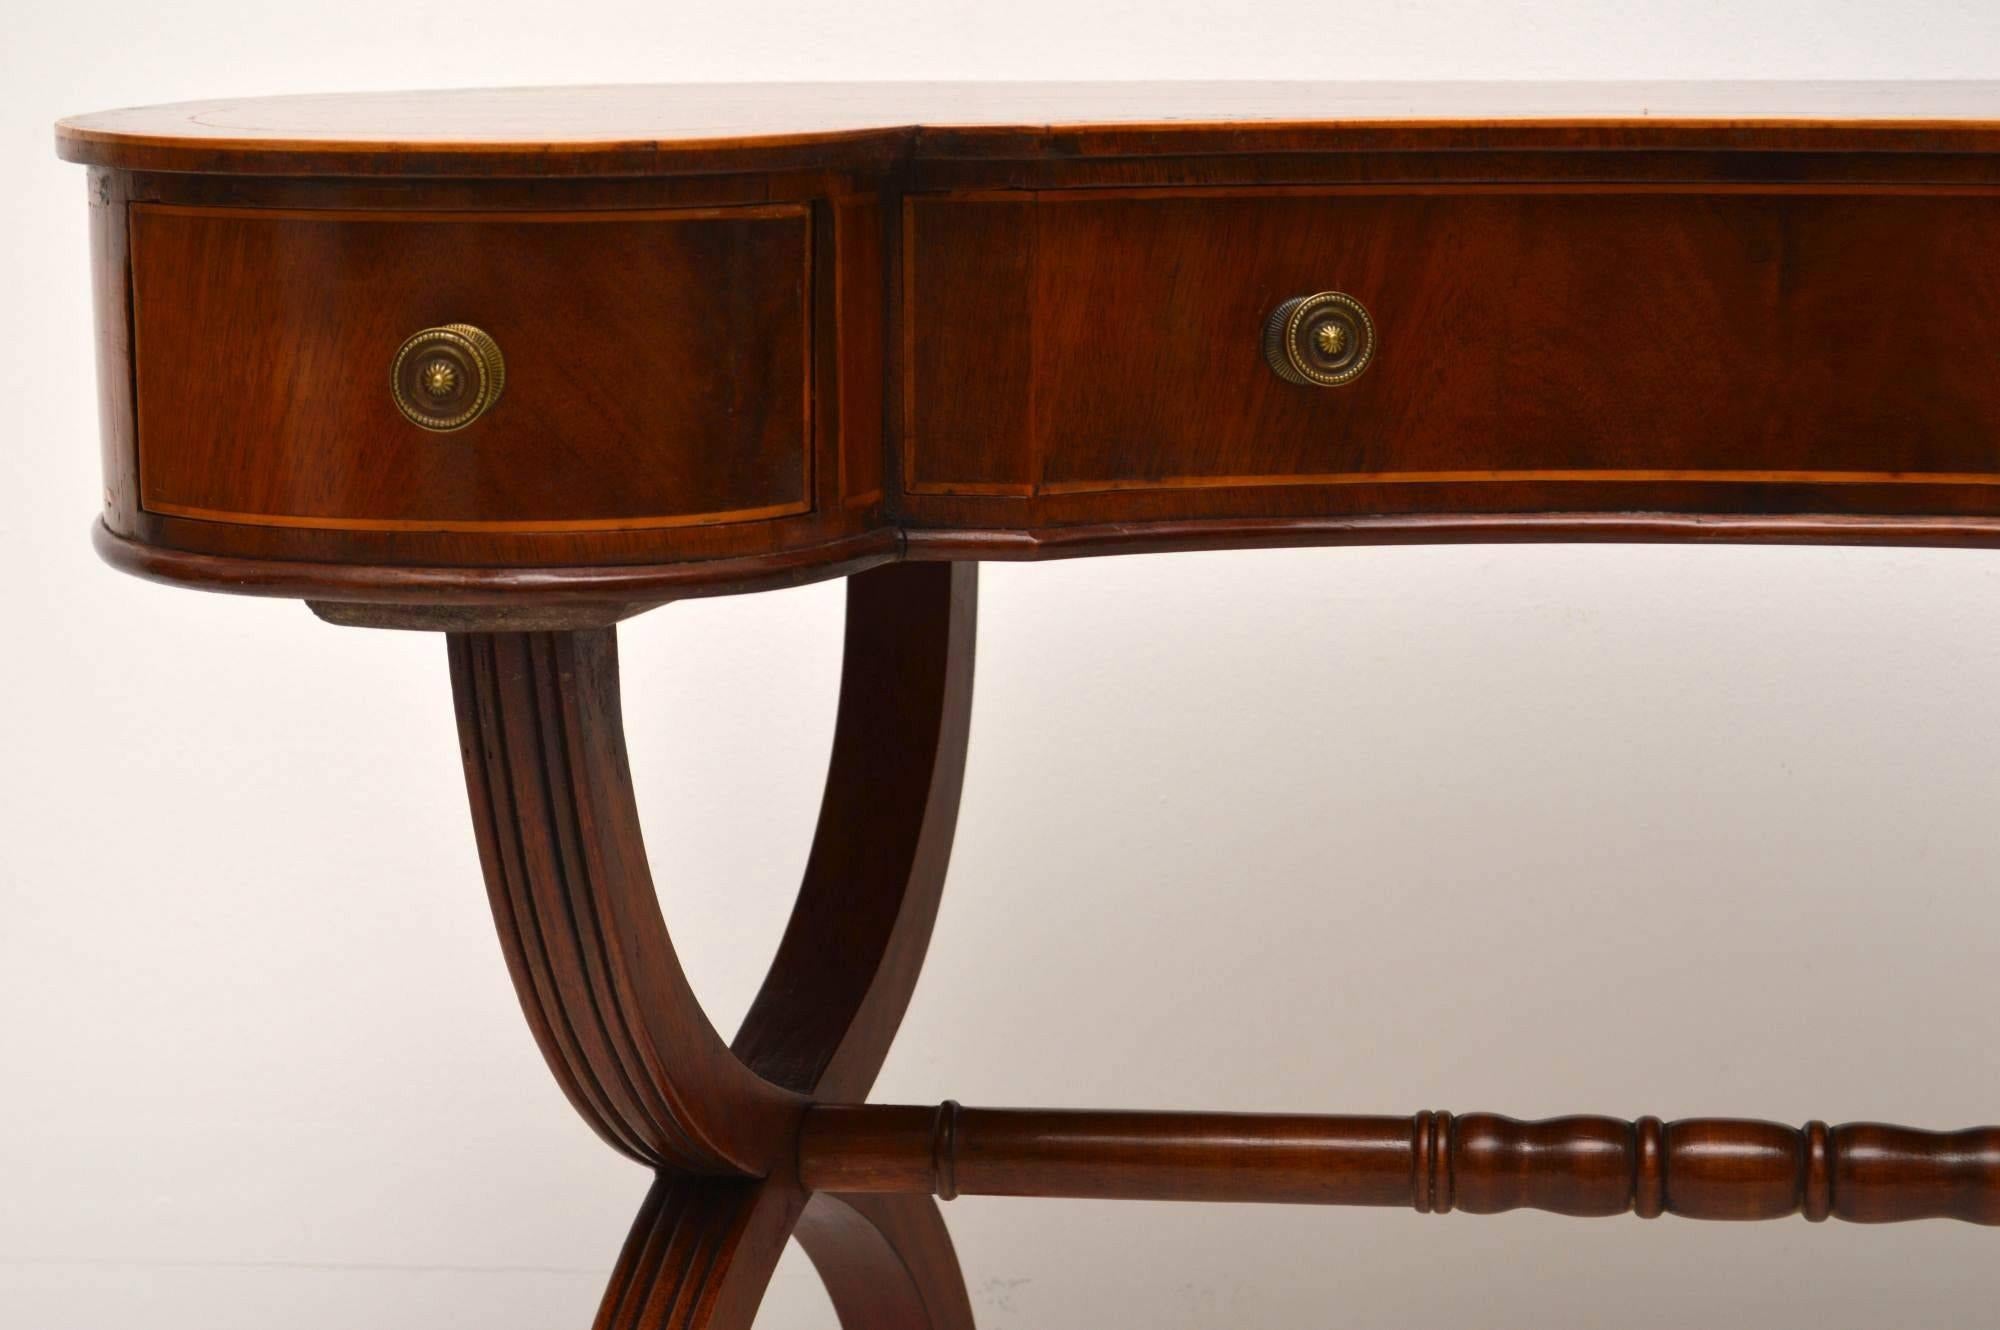 Antique Mahogany Kidney Shaped Desk or Dressing Table 1